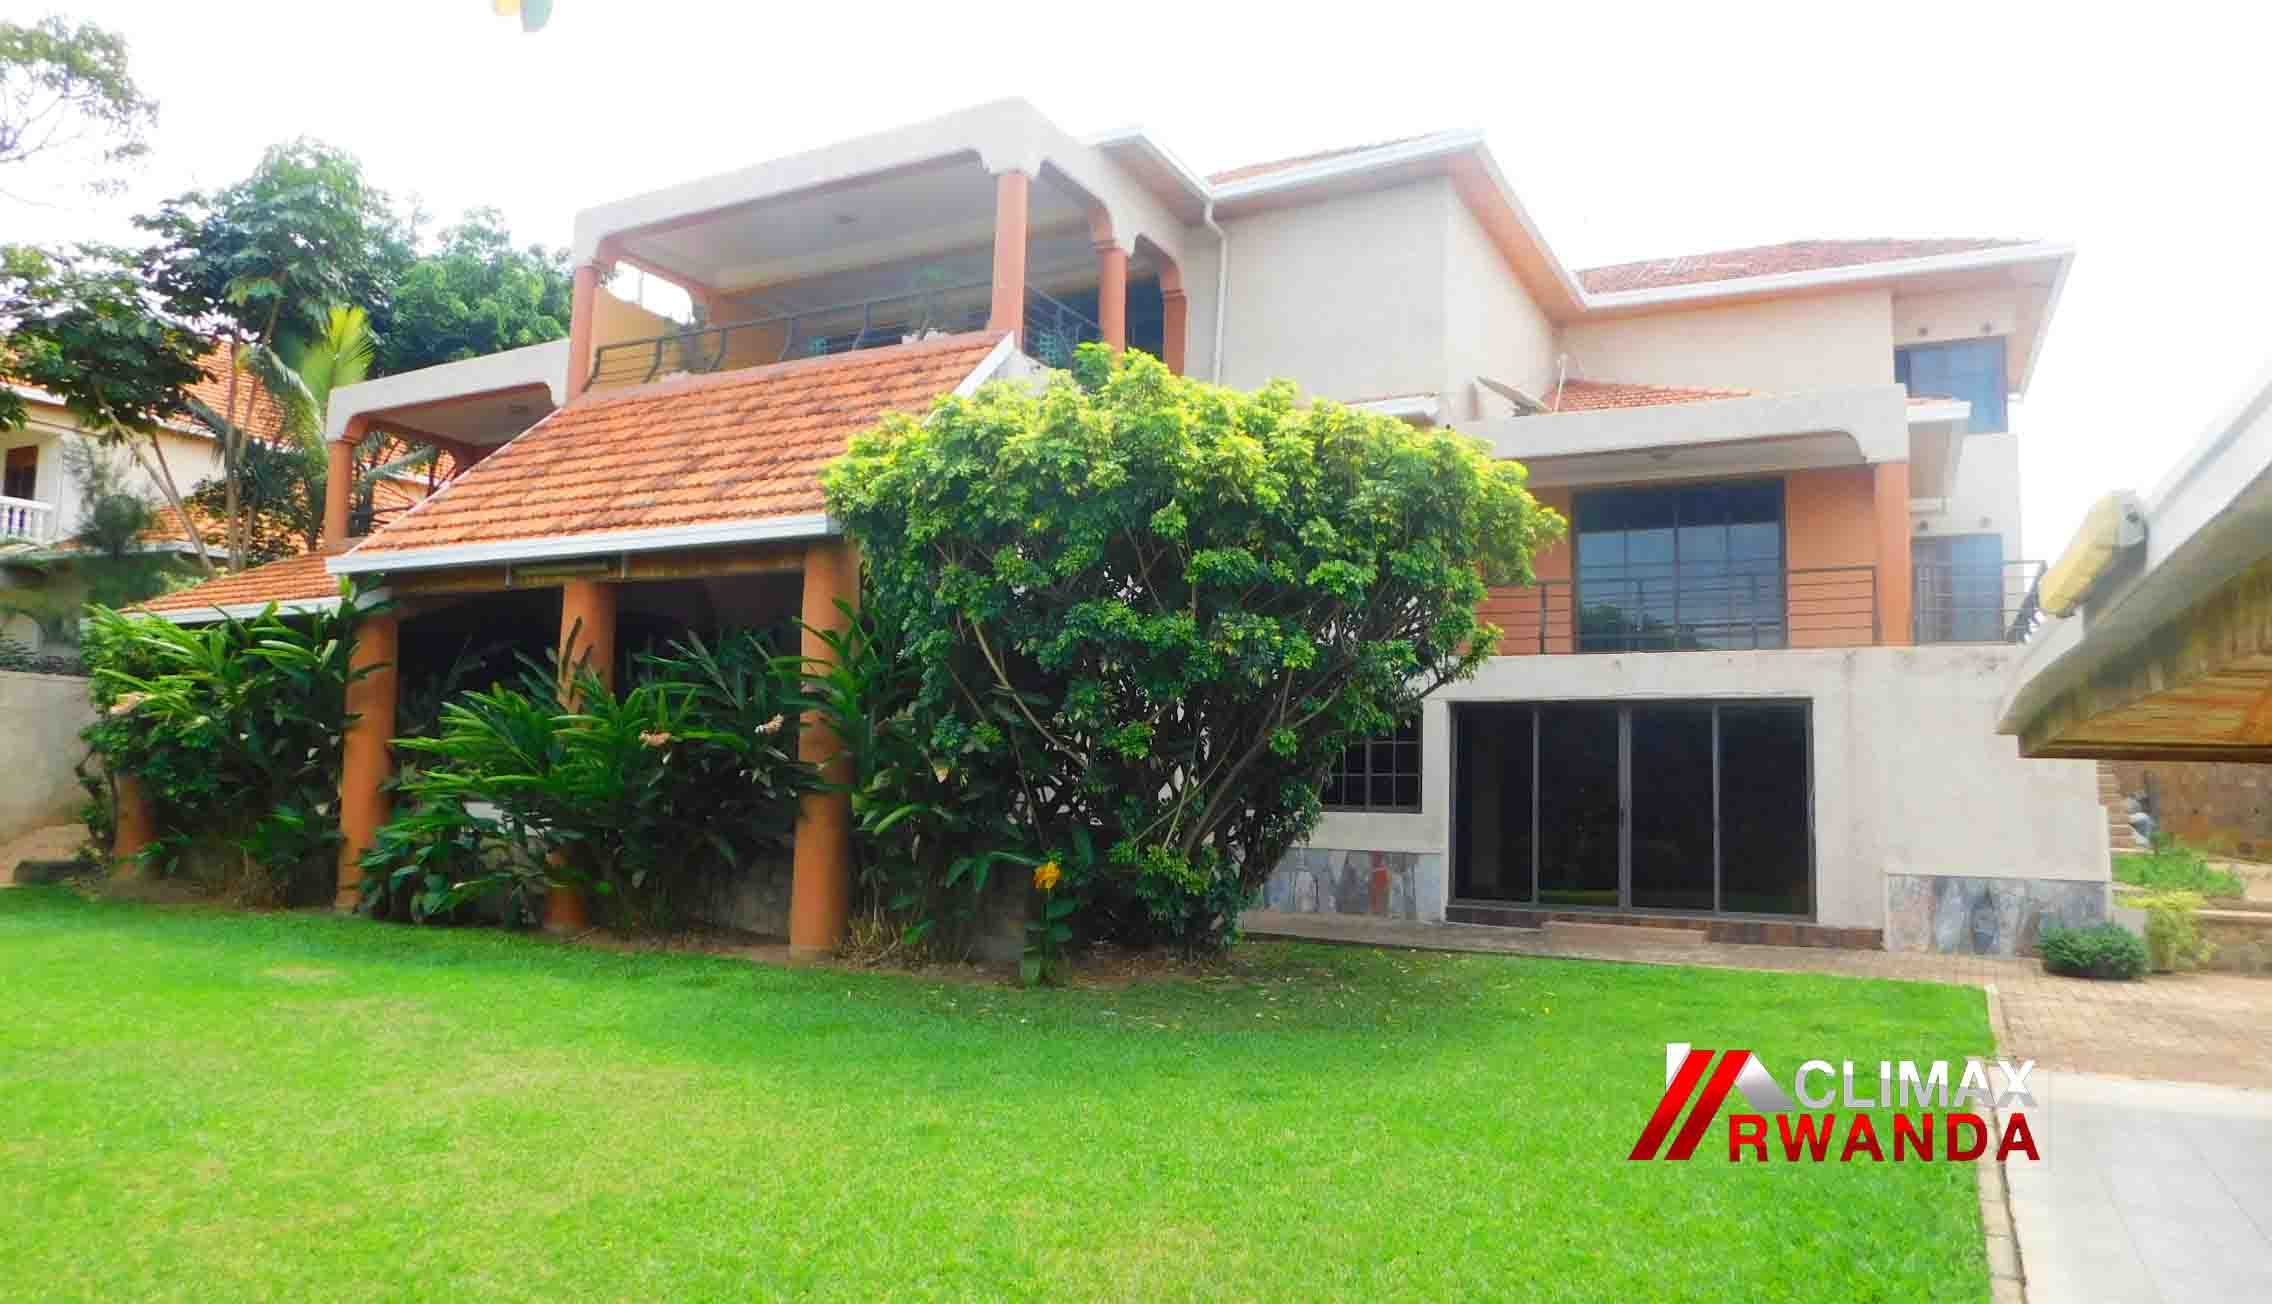 Beautiful Unfurnished High End classy Home for Rent in Gacuriro